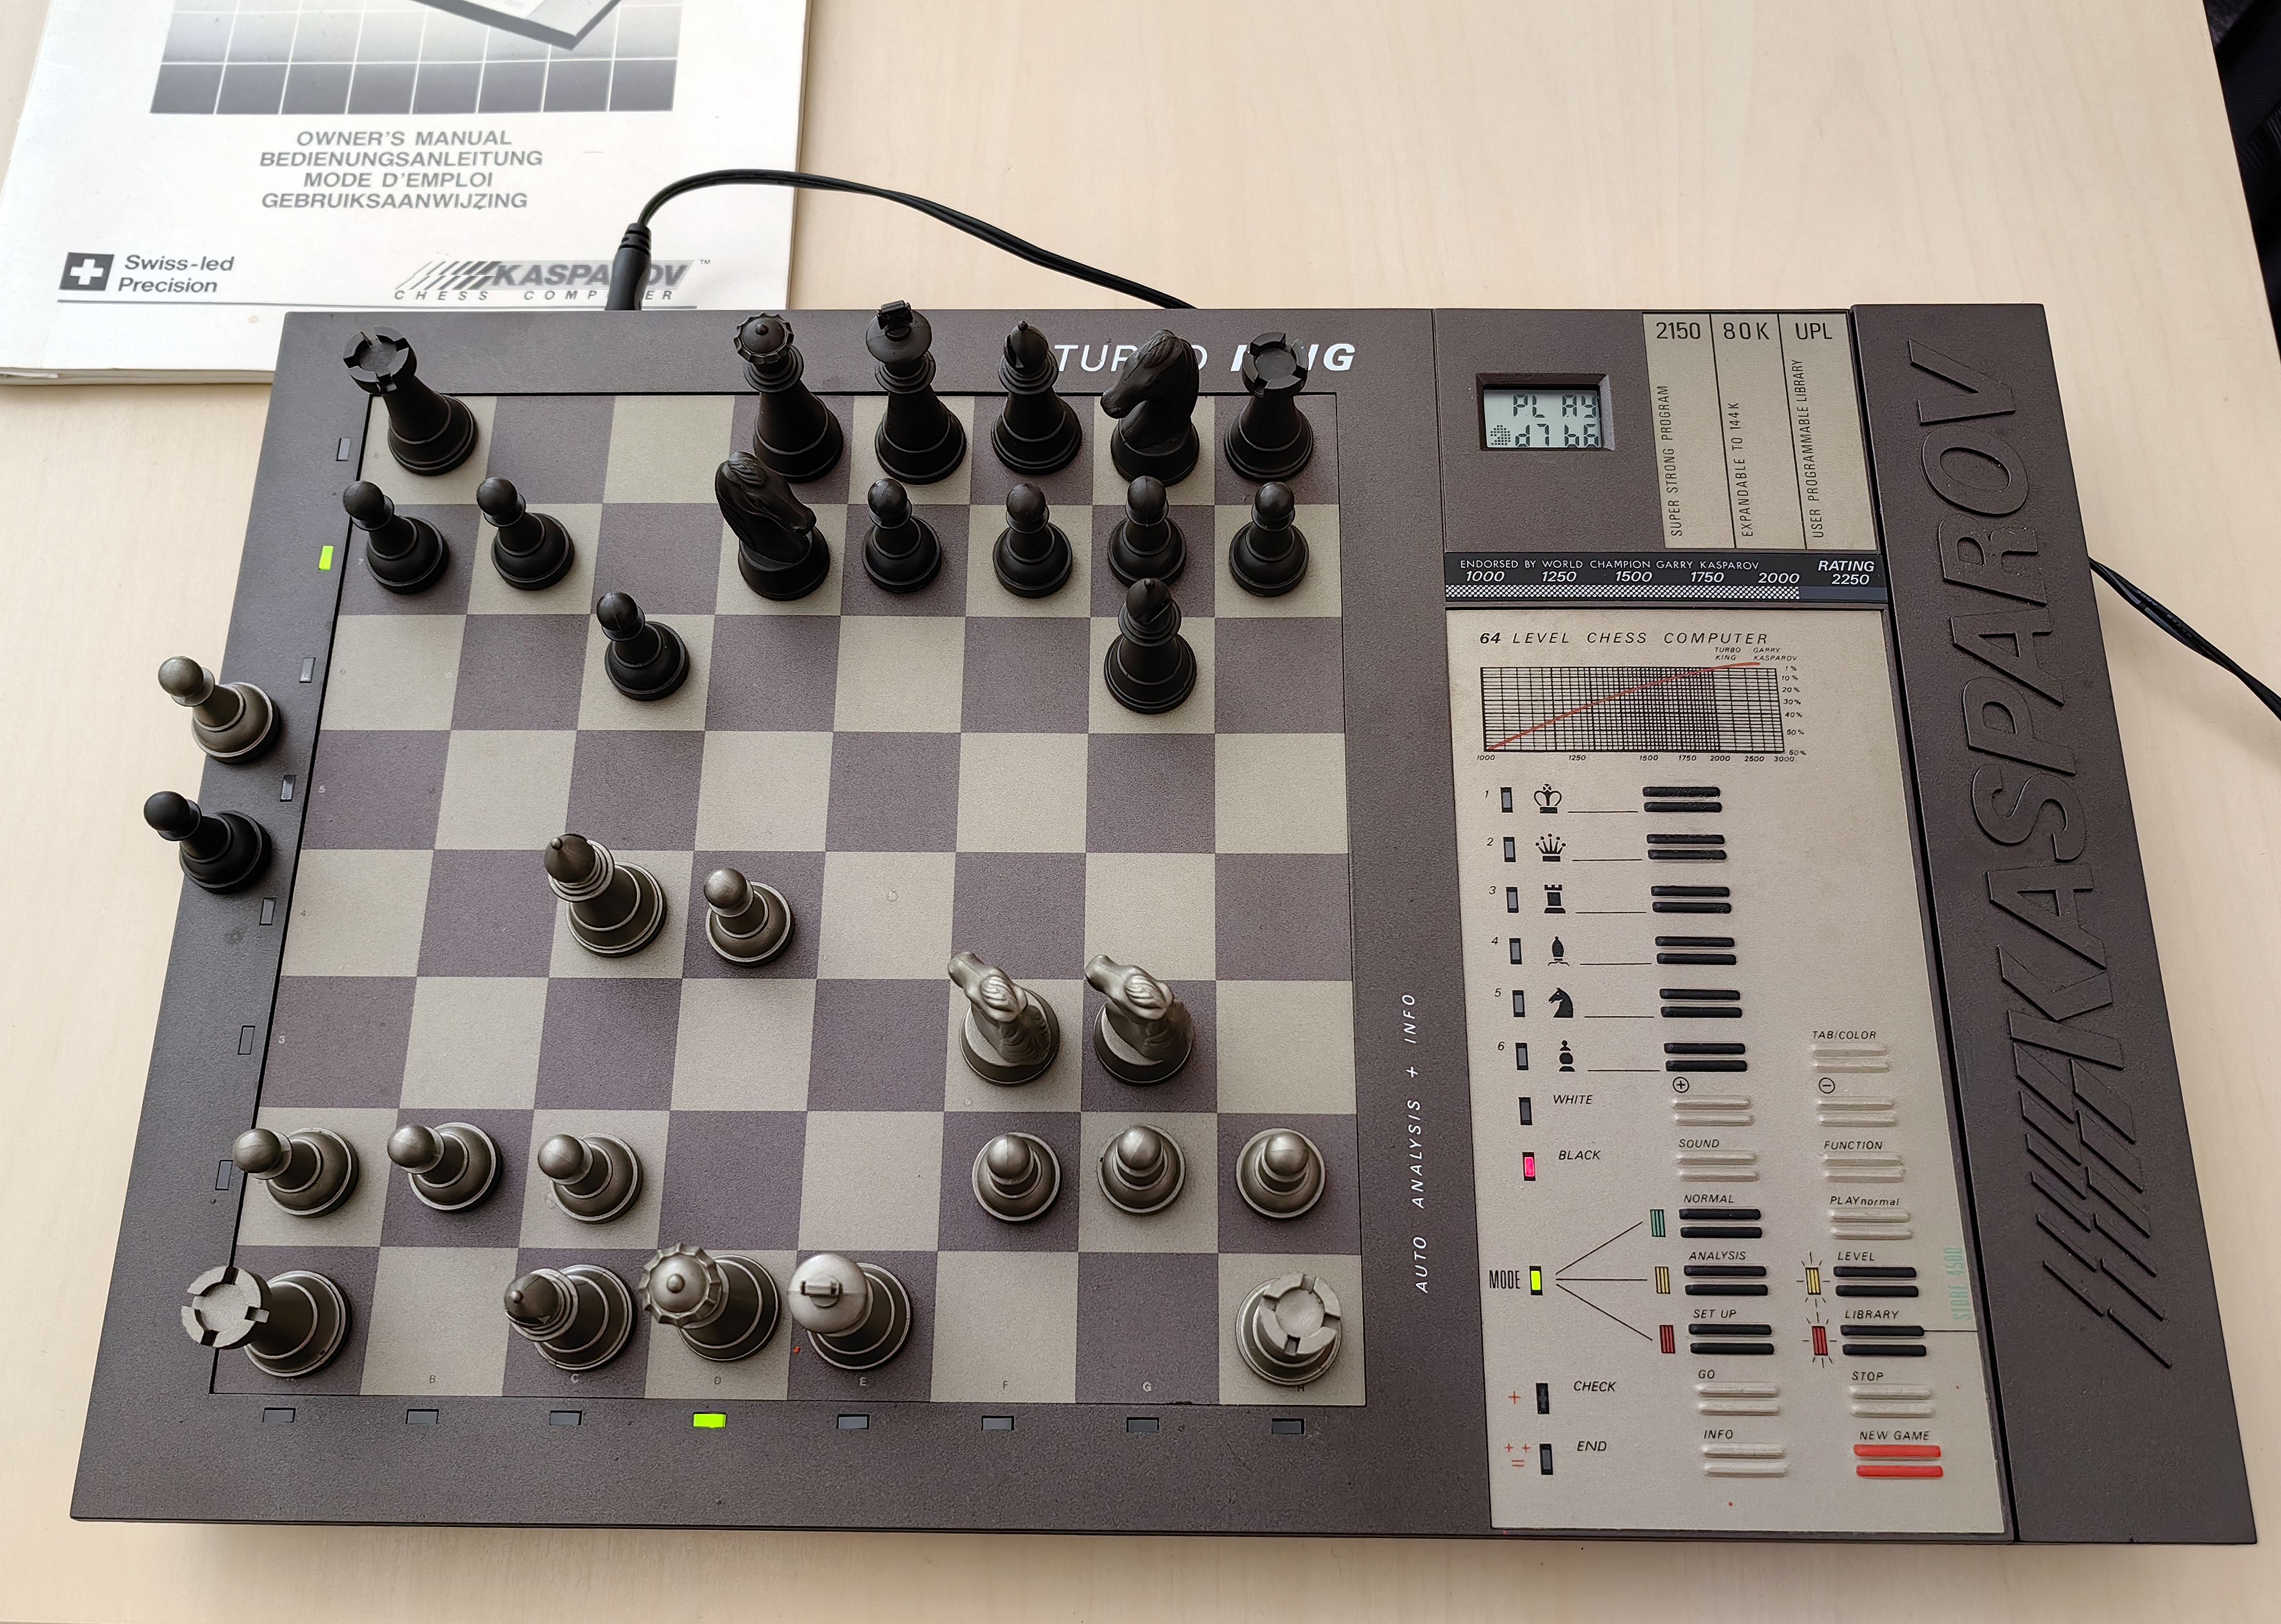 World's Oldest Chess Computer vs. The Newest Chess Computer